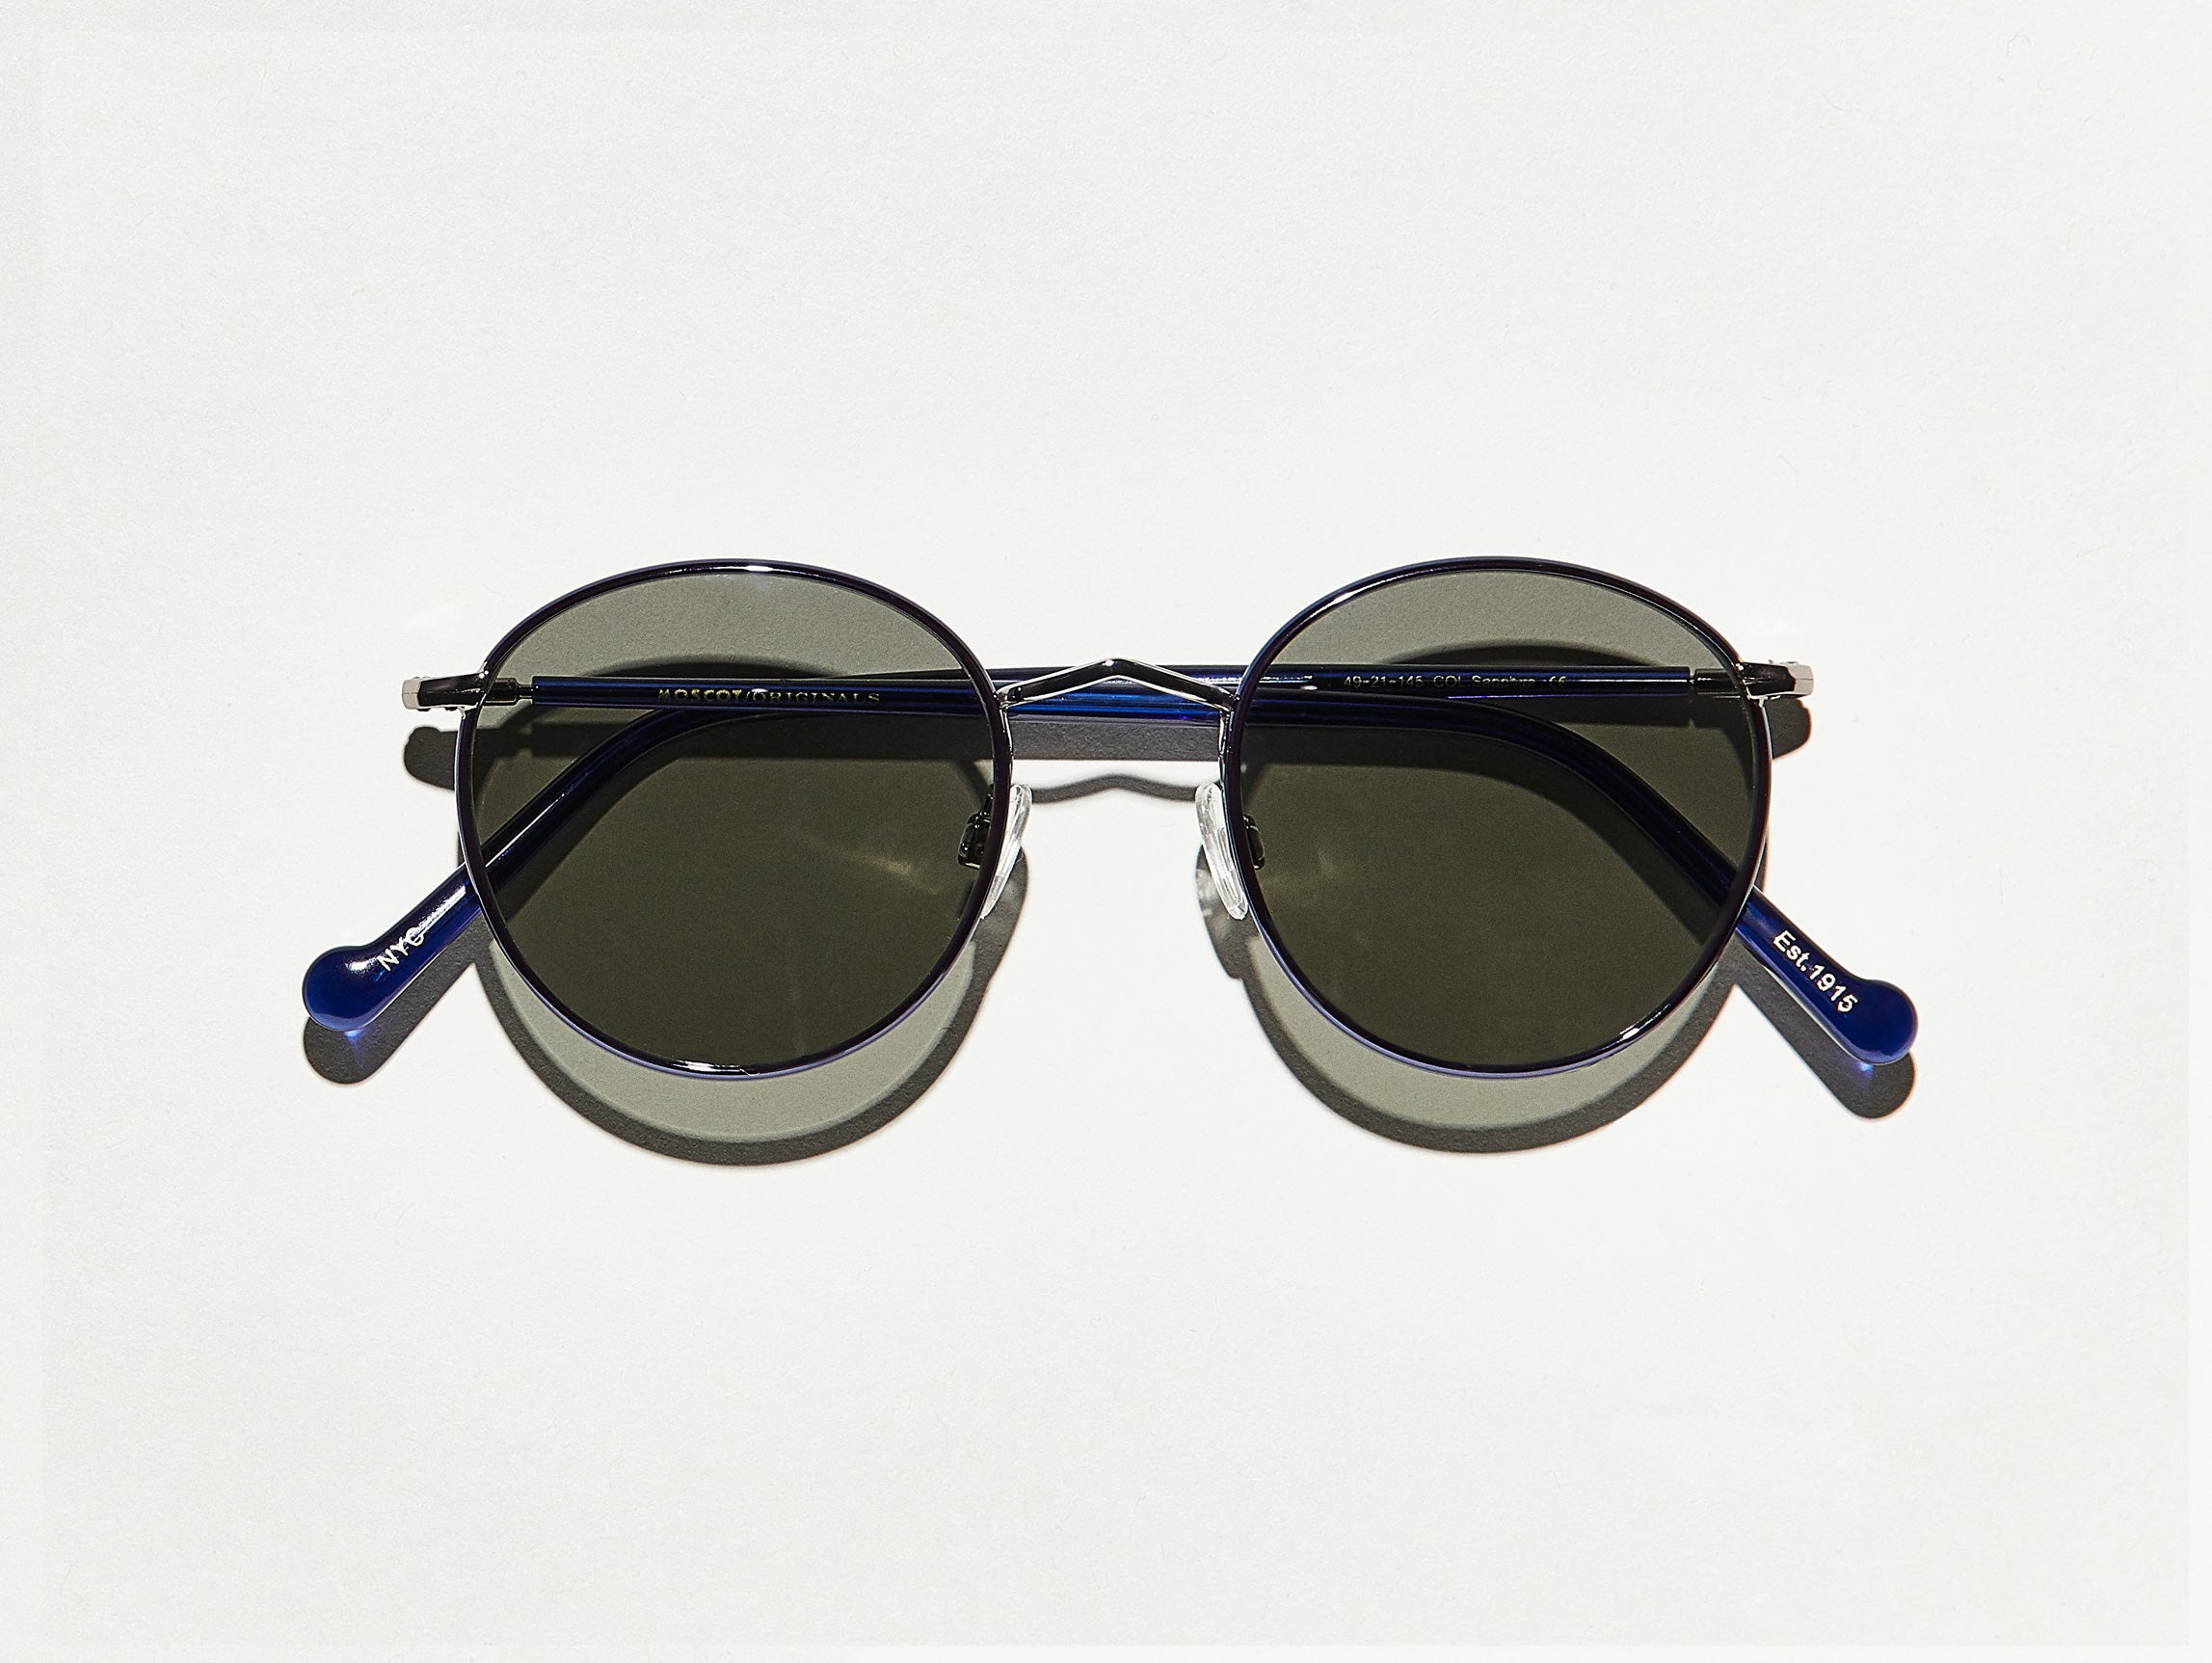 The ZEV SUN in Sapphire/Pewter with Grey Glass Lenses